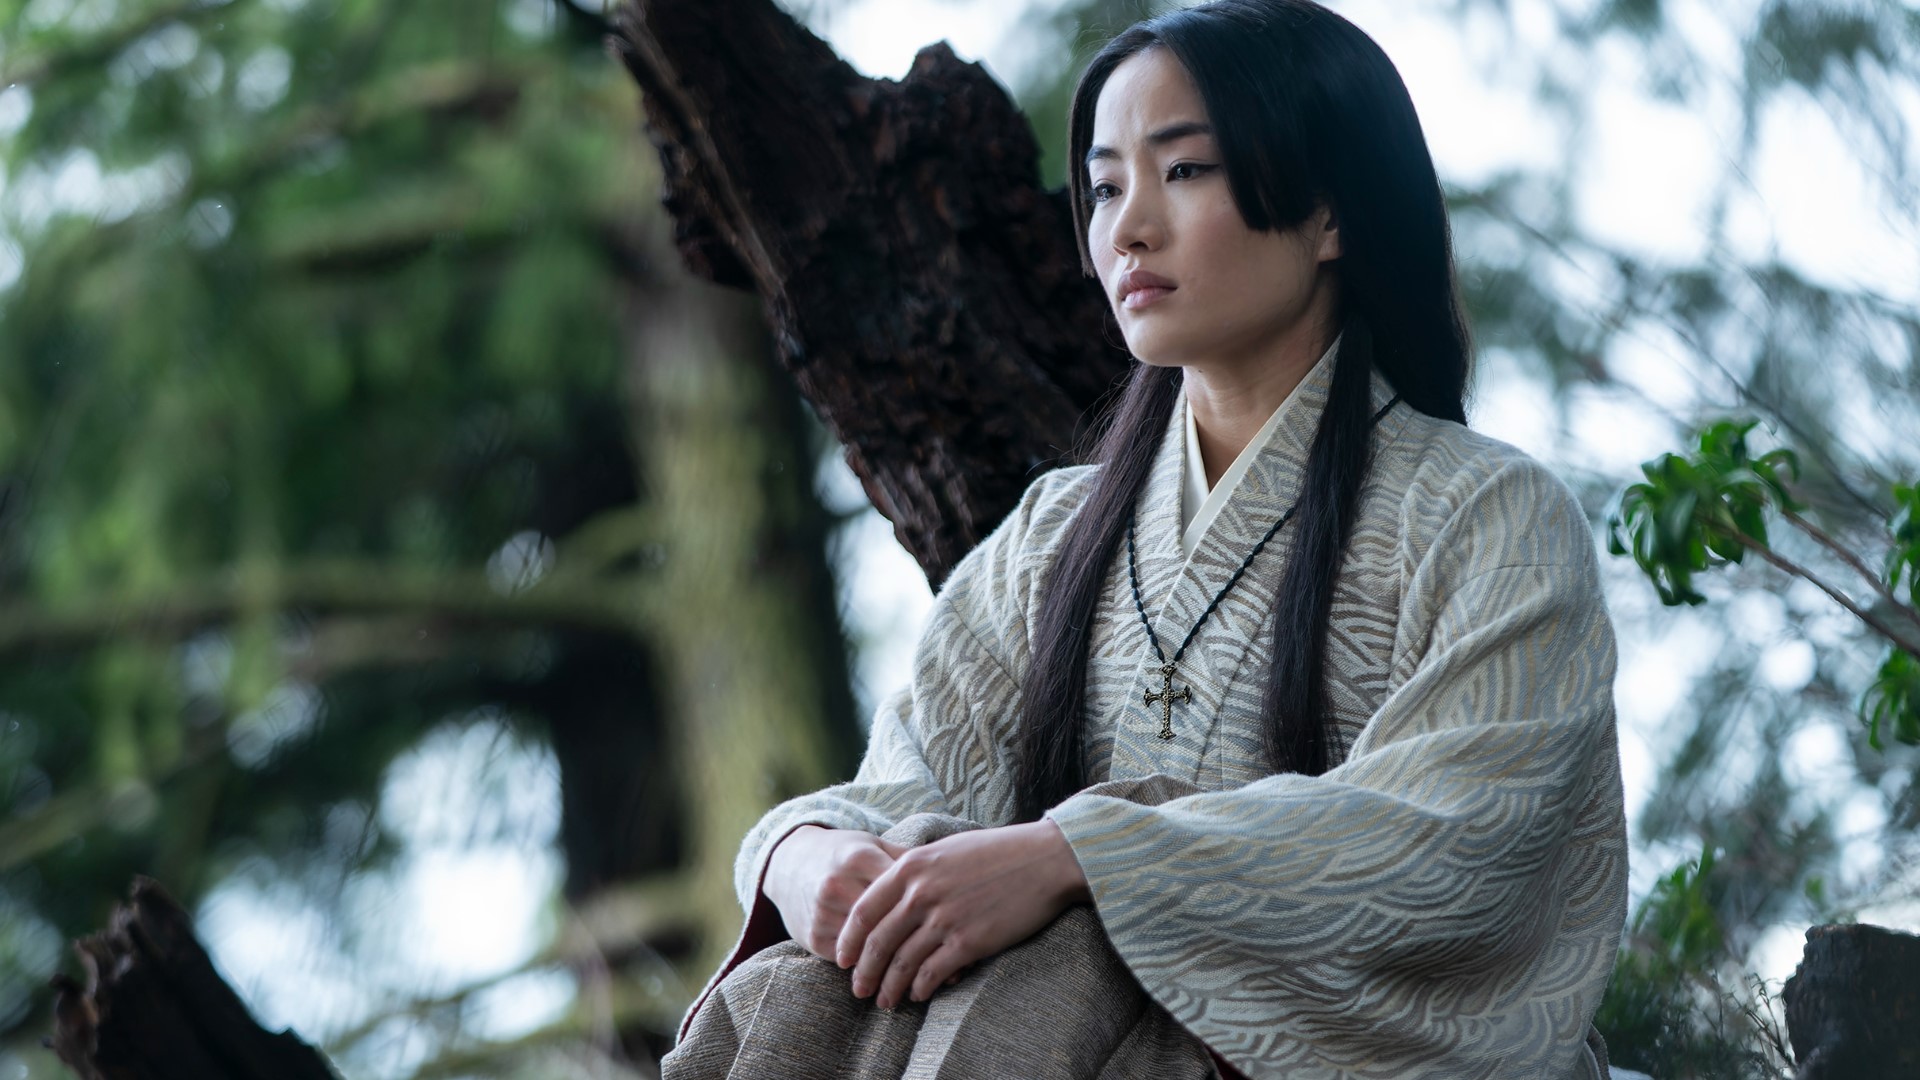 All 10 episodes of the historical drama are now streaming on Hulu.